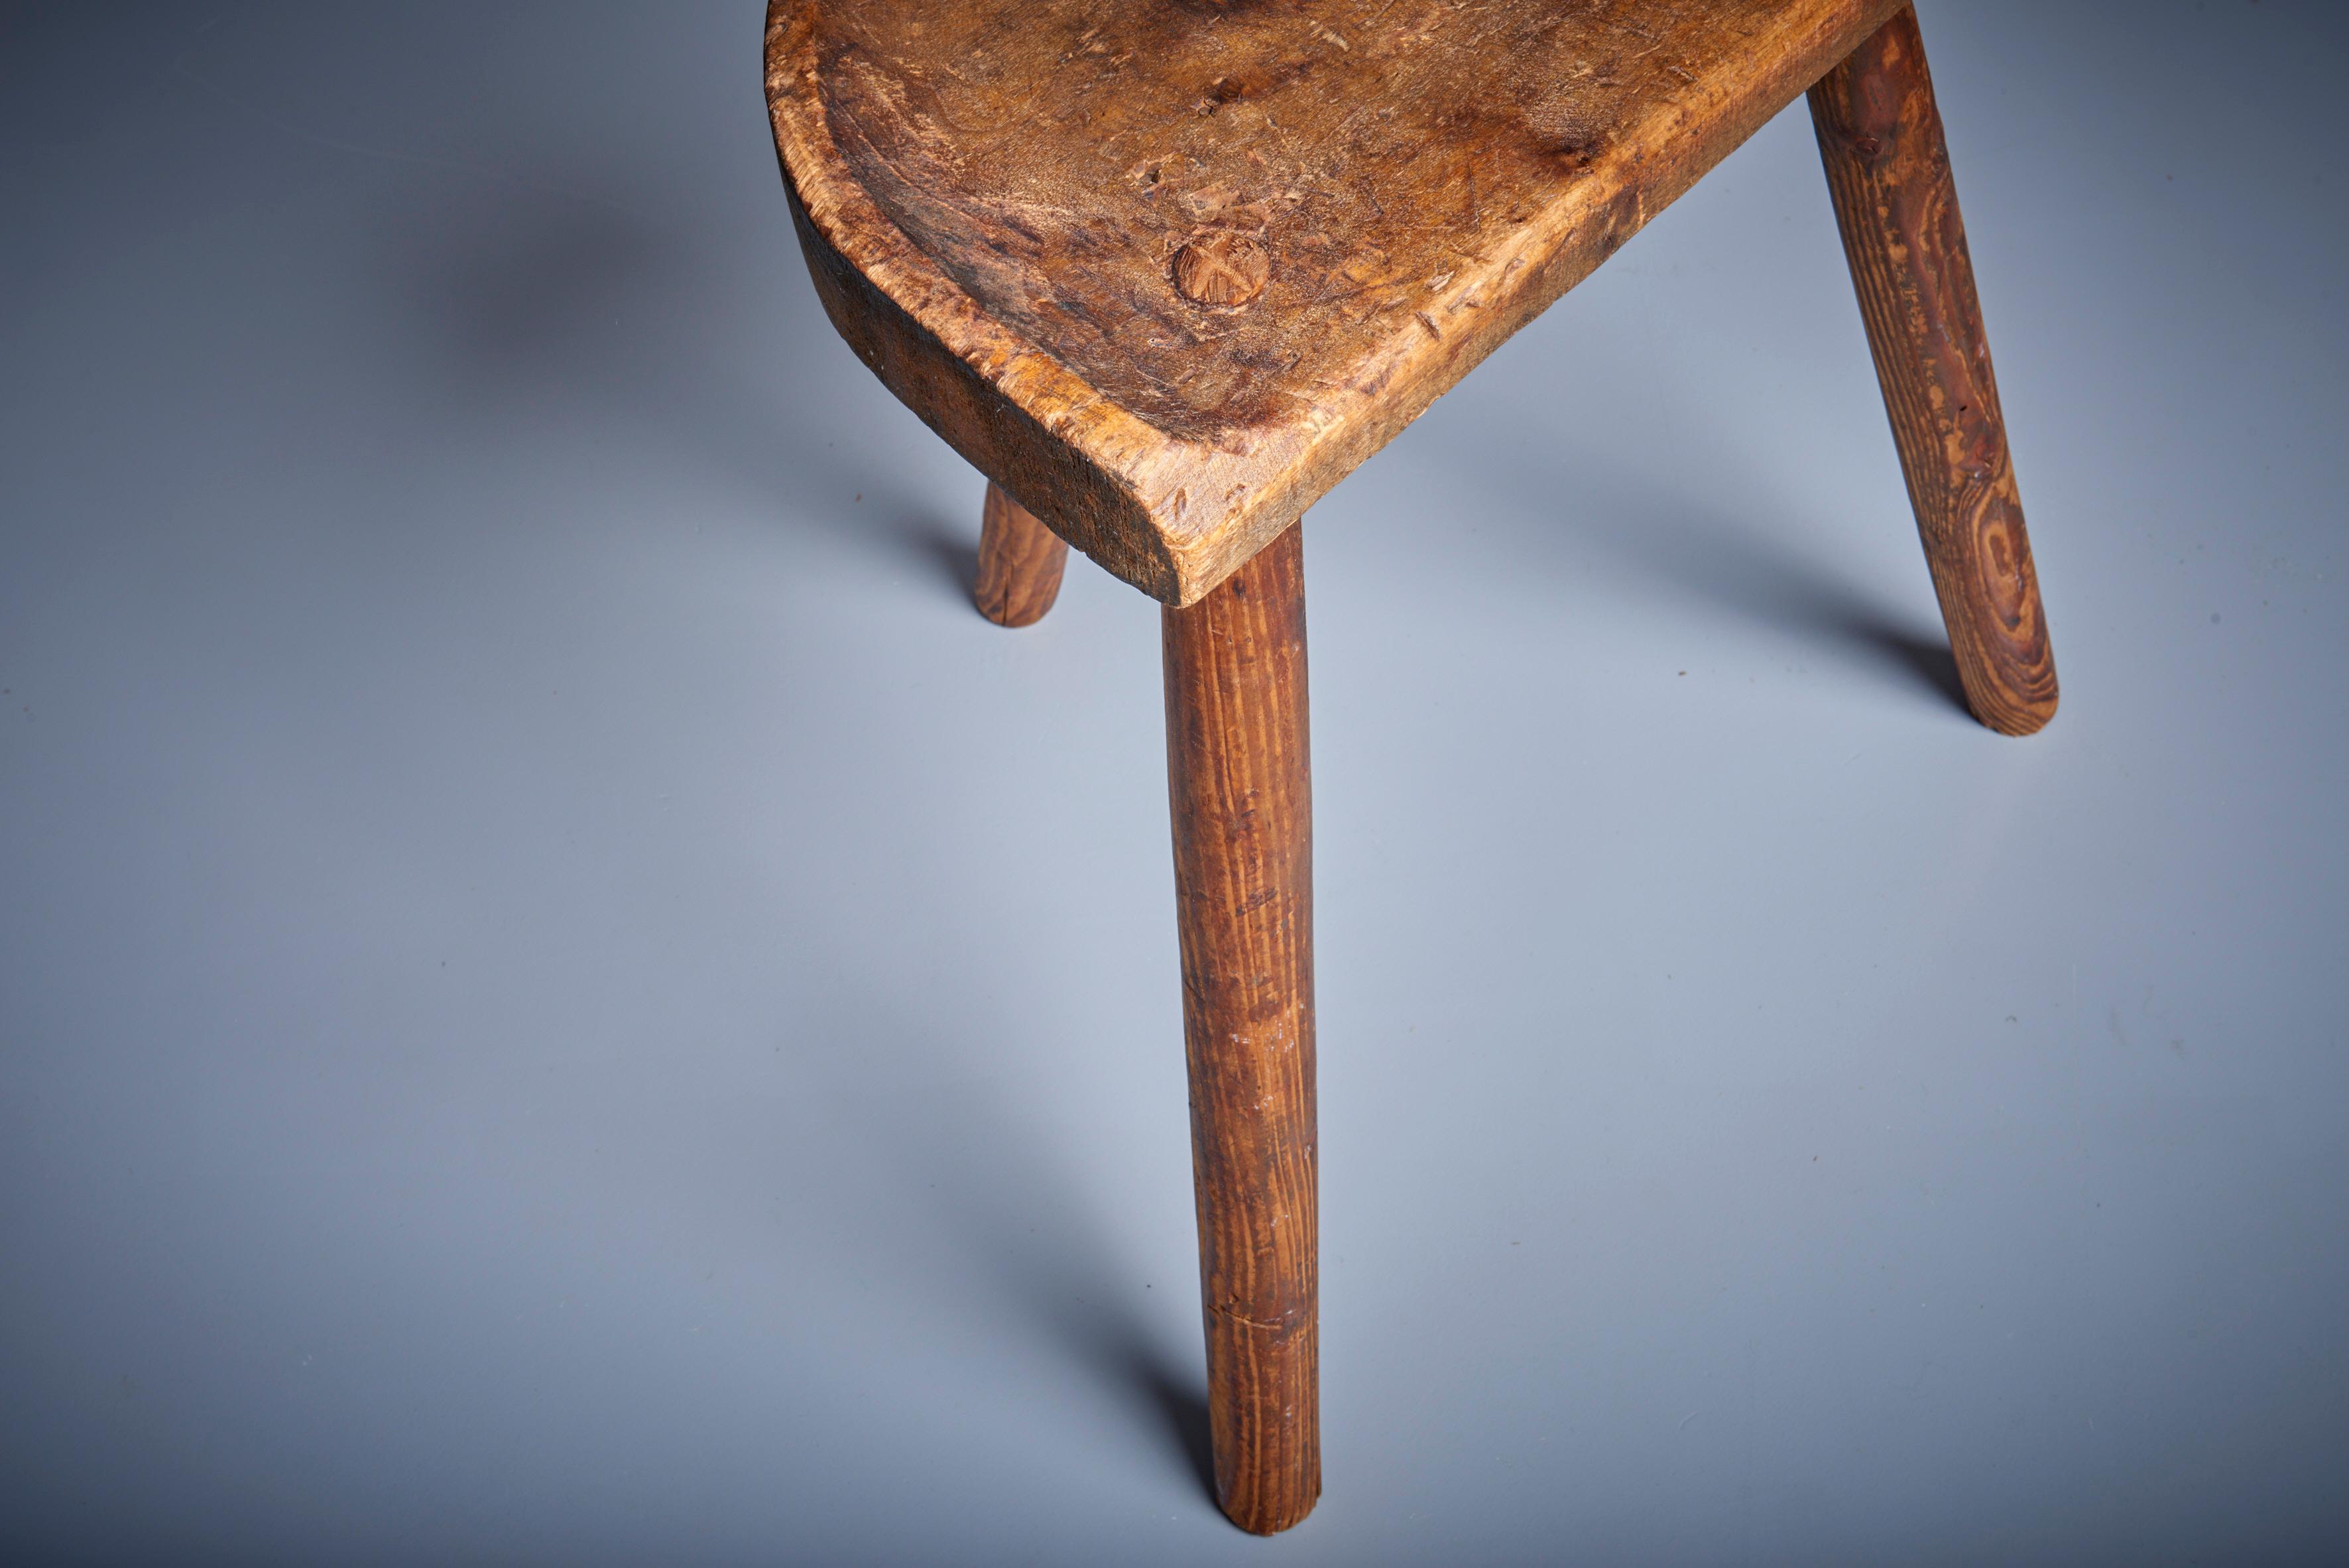 Antique black Forest Farmers tripod stool 19th century in pine wood, Germany
This stool has a very beautiful overall patina and is very sturdy.